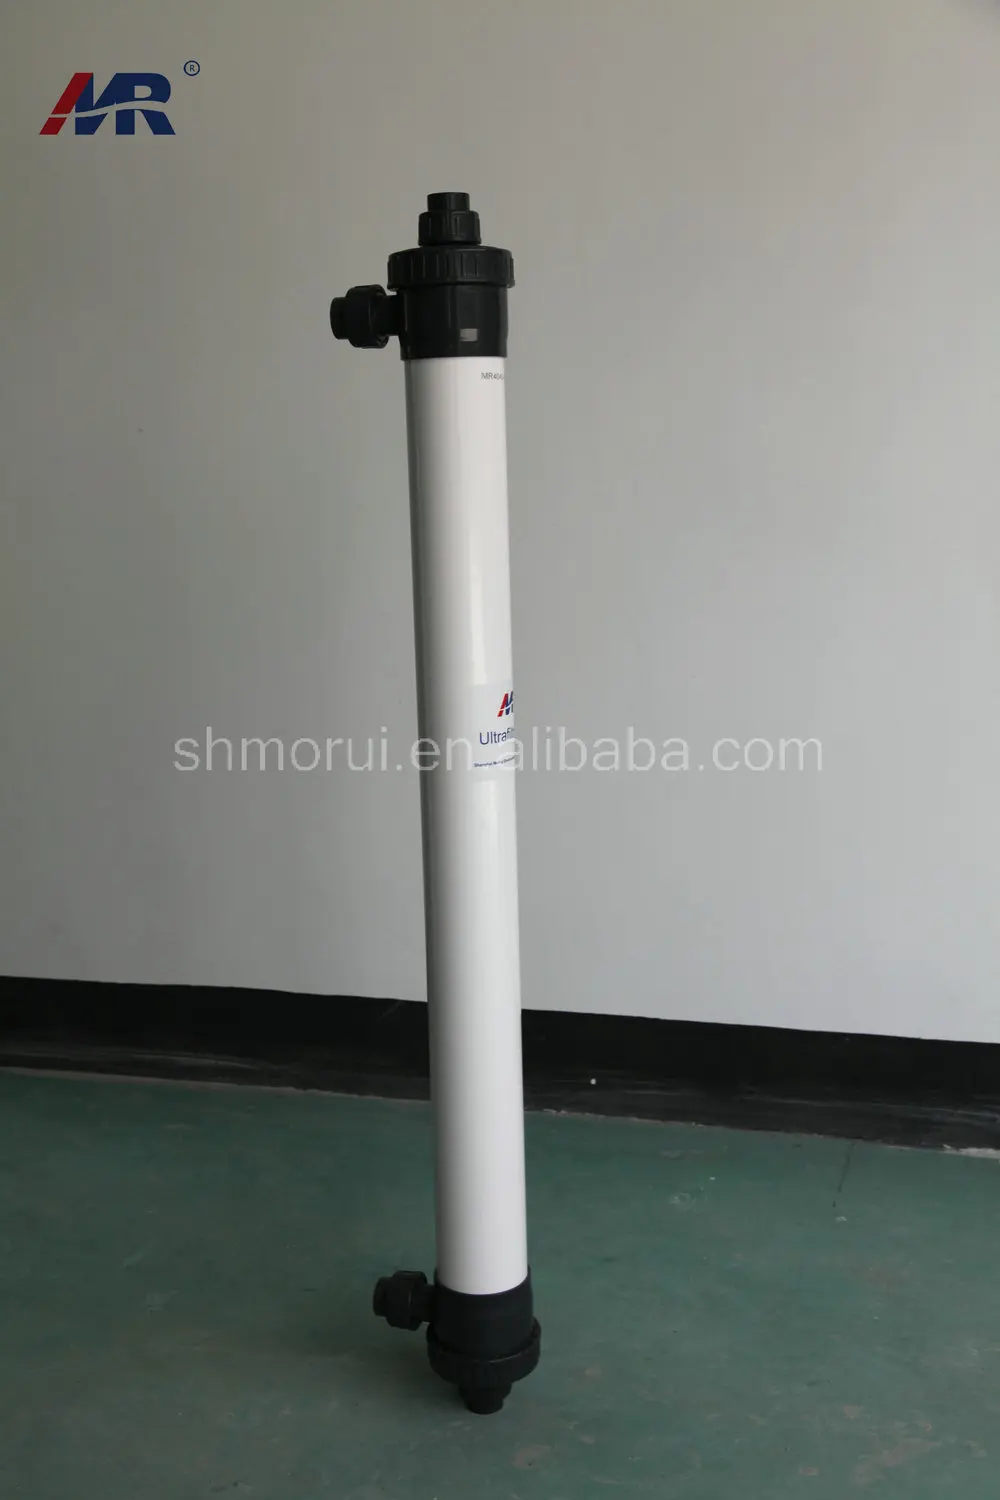 Morui UF membrane 4046 manufacturer with best factory price